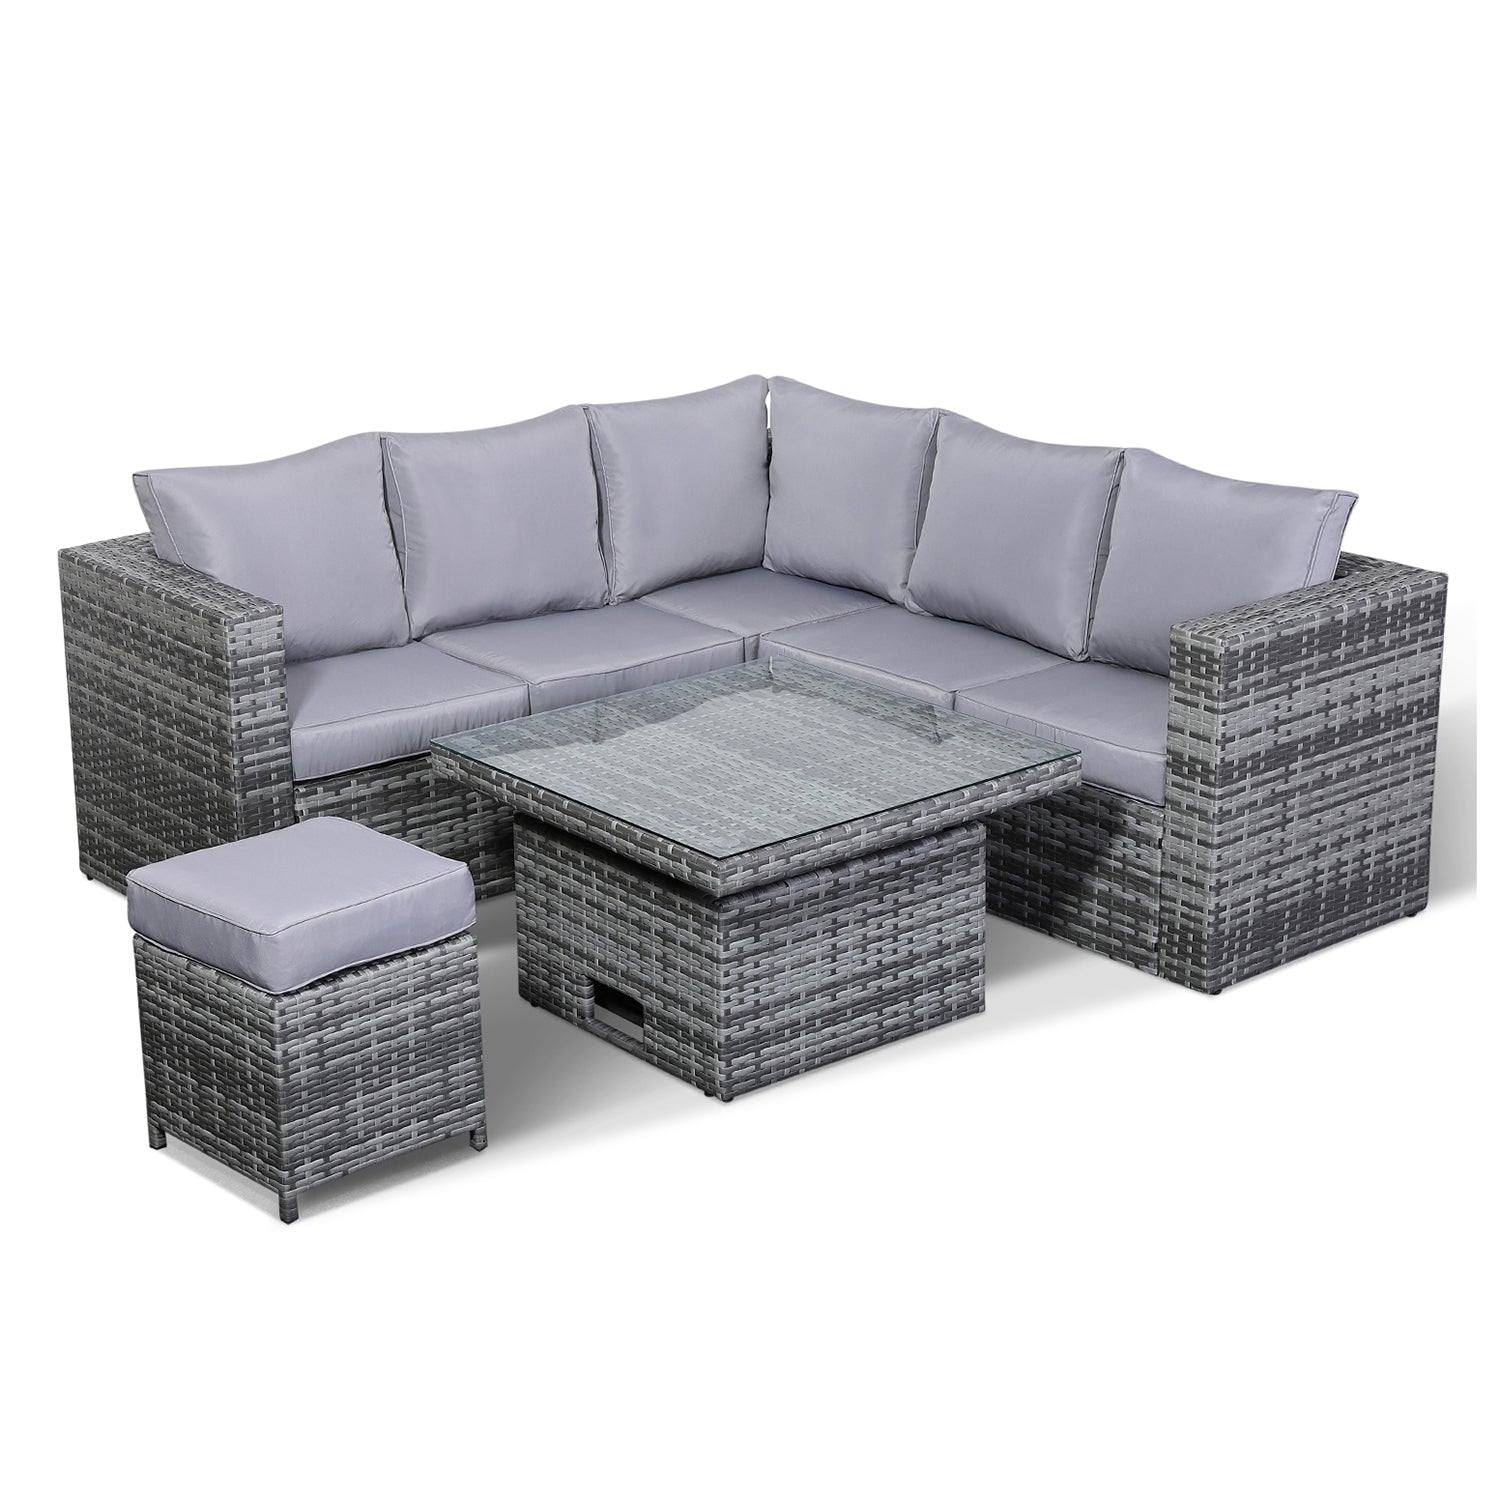 Rose Range Small Dining Corner Sofa Set with Rising Table In Grey